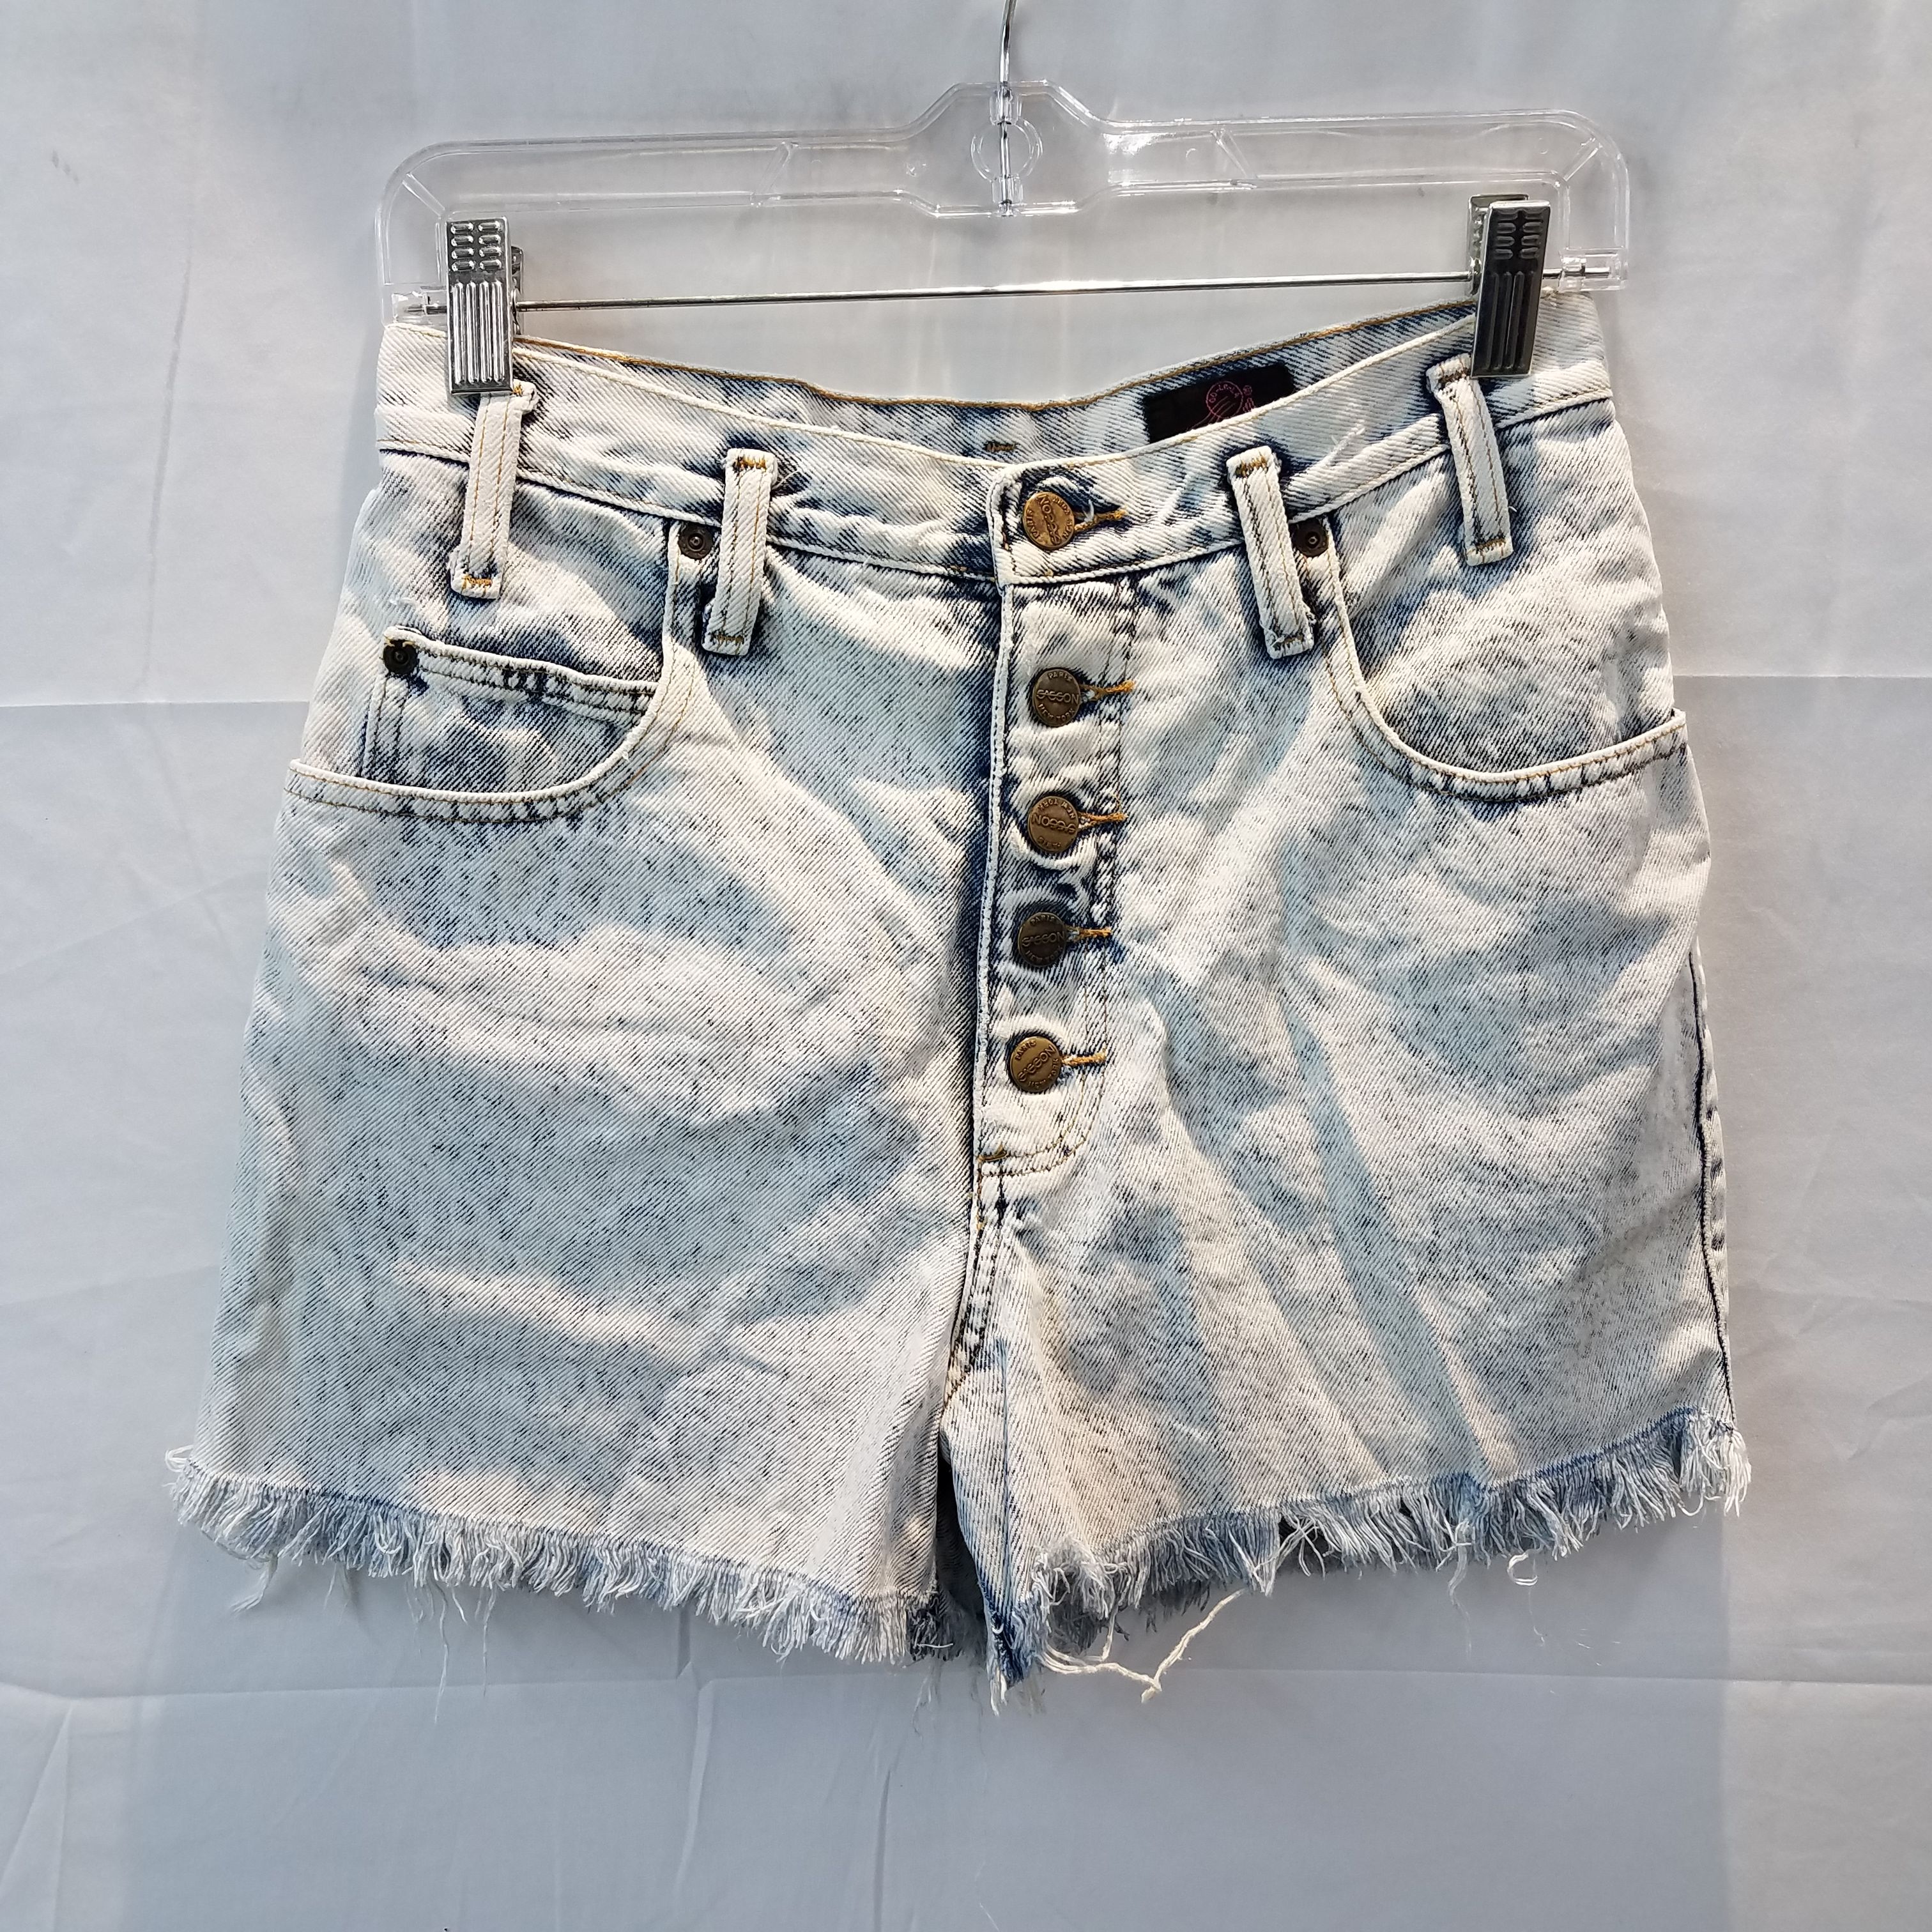 Supreme Cut off Denim Shorts. Size 32inch. In-store Now. かなり